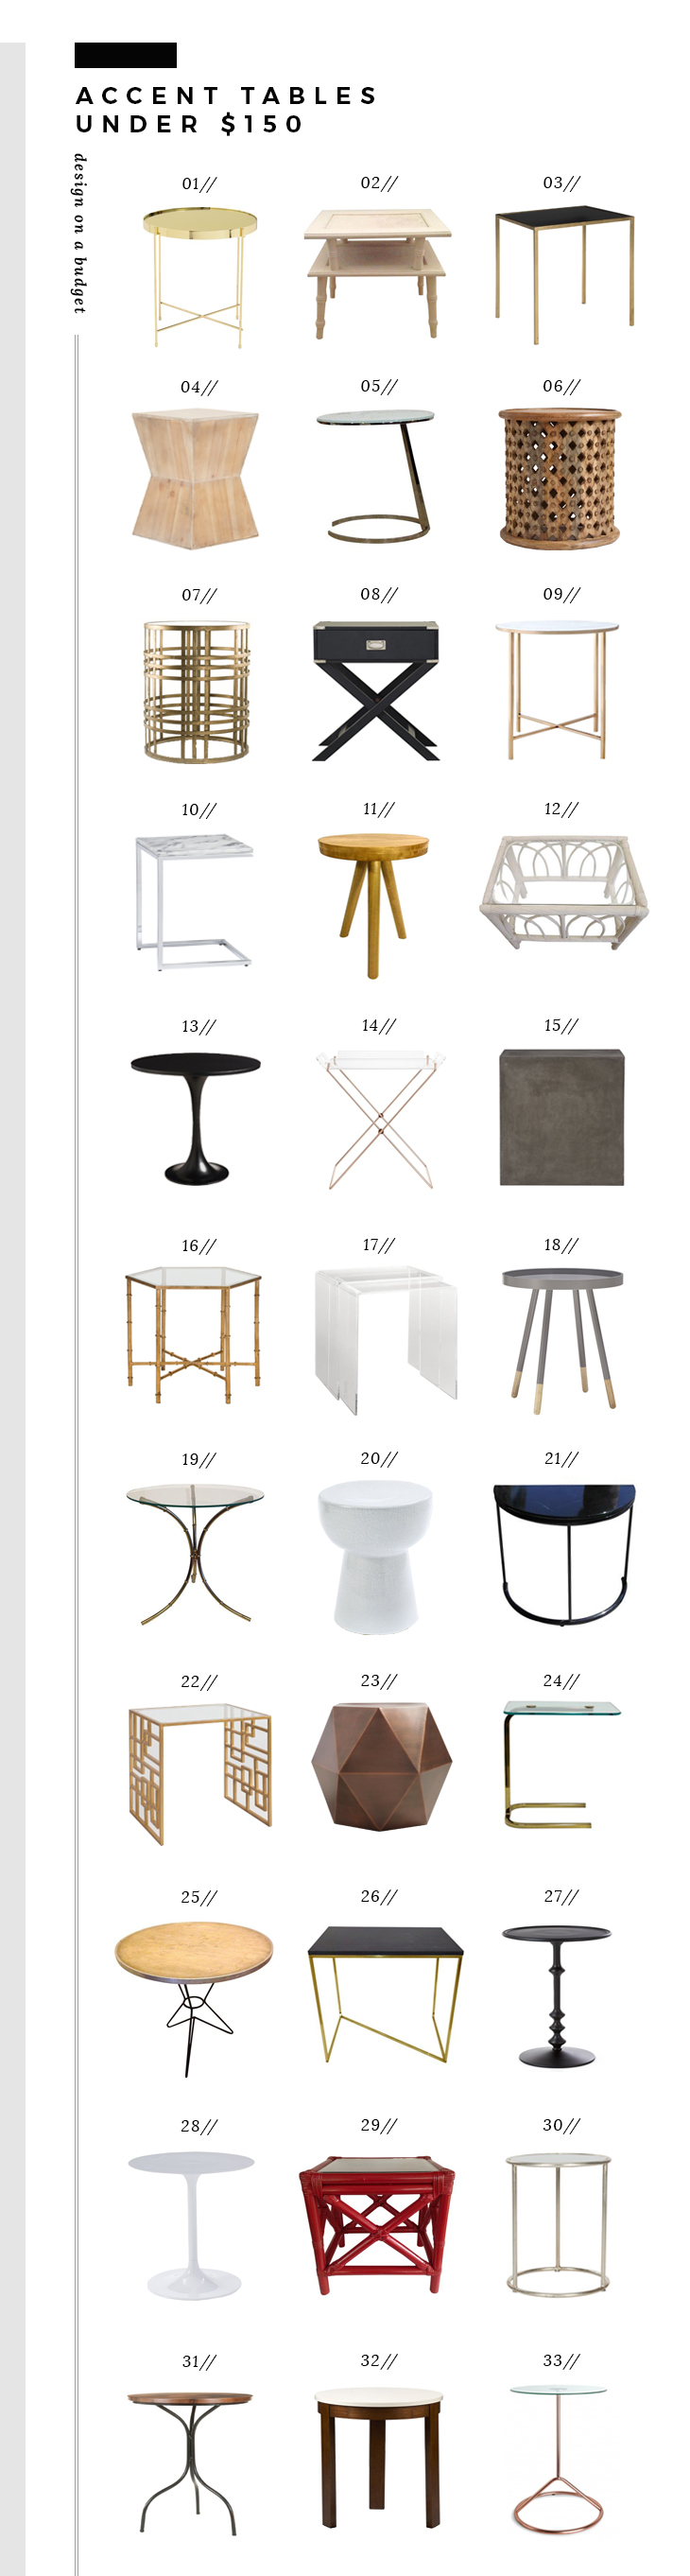 Accent Tables Under $150